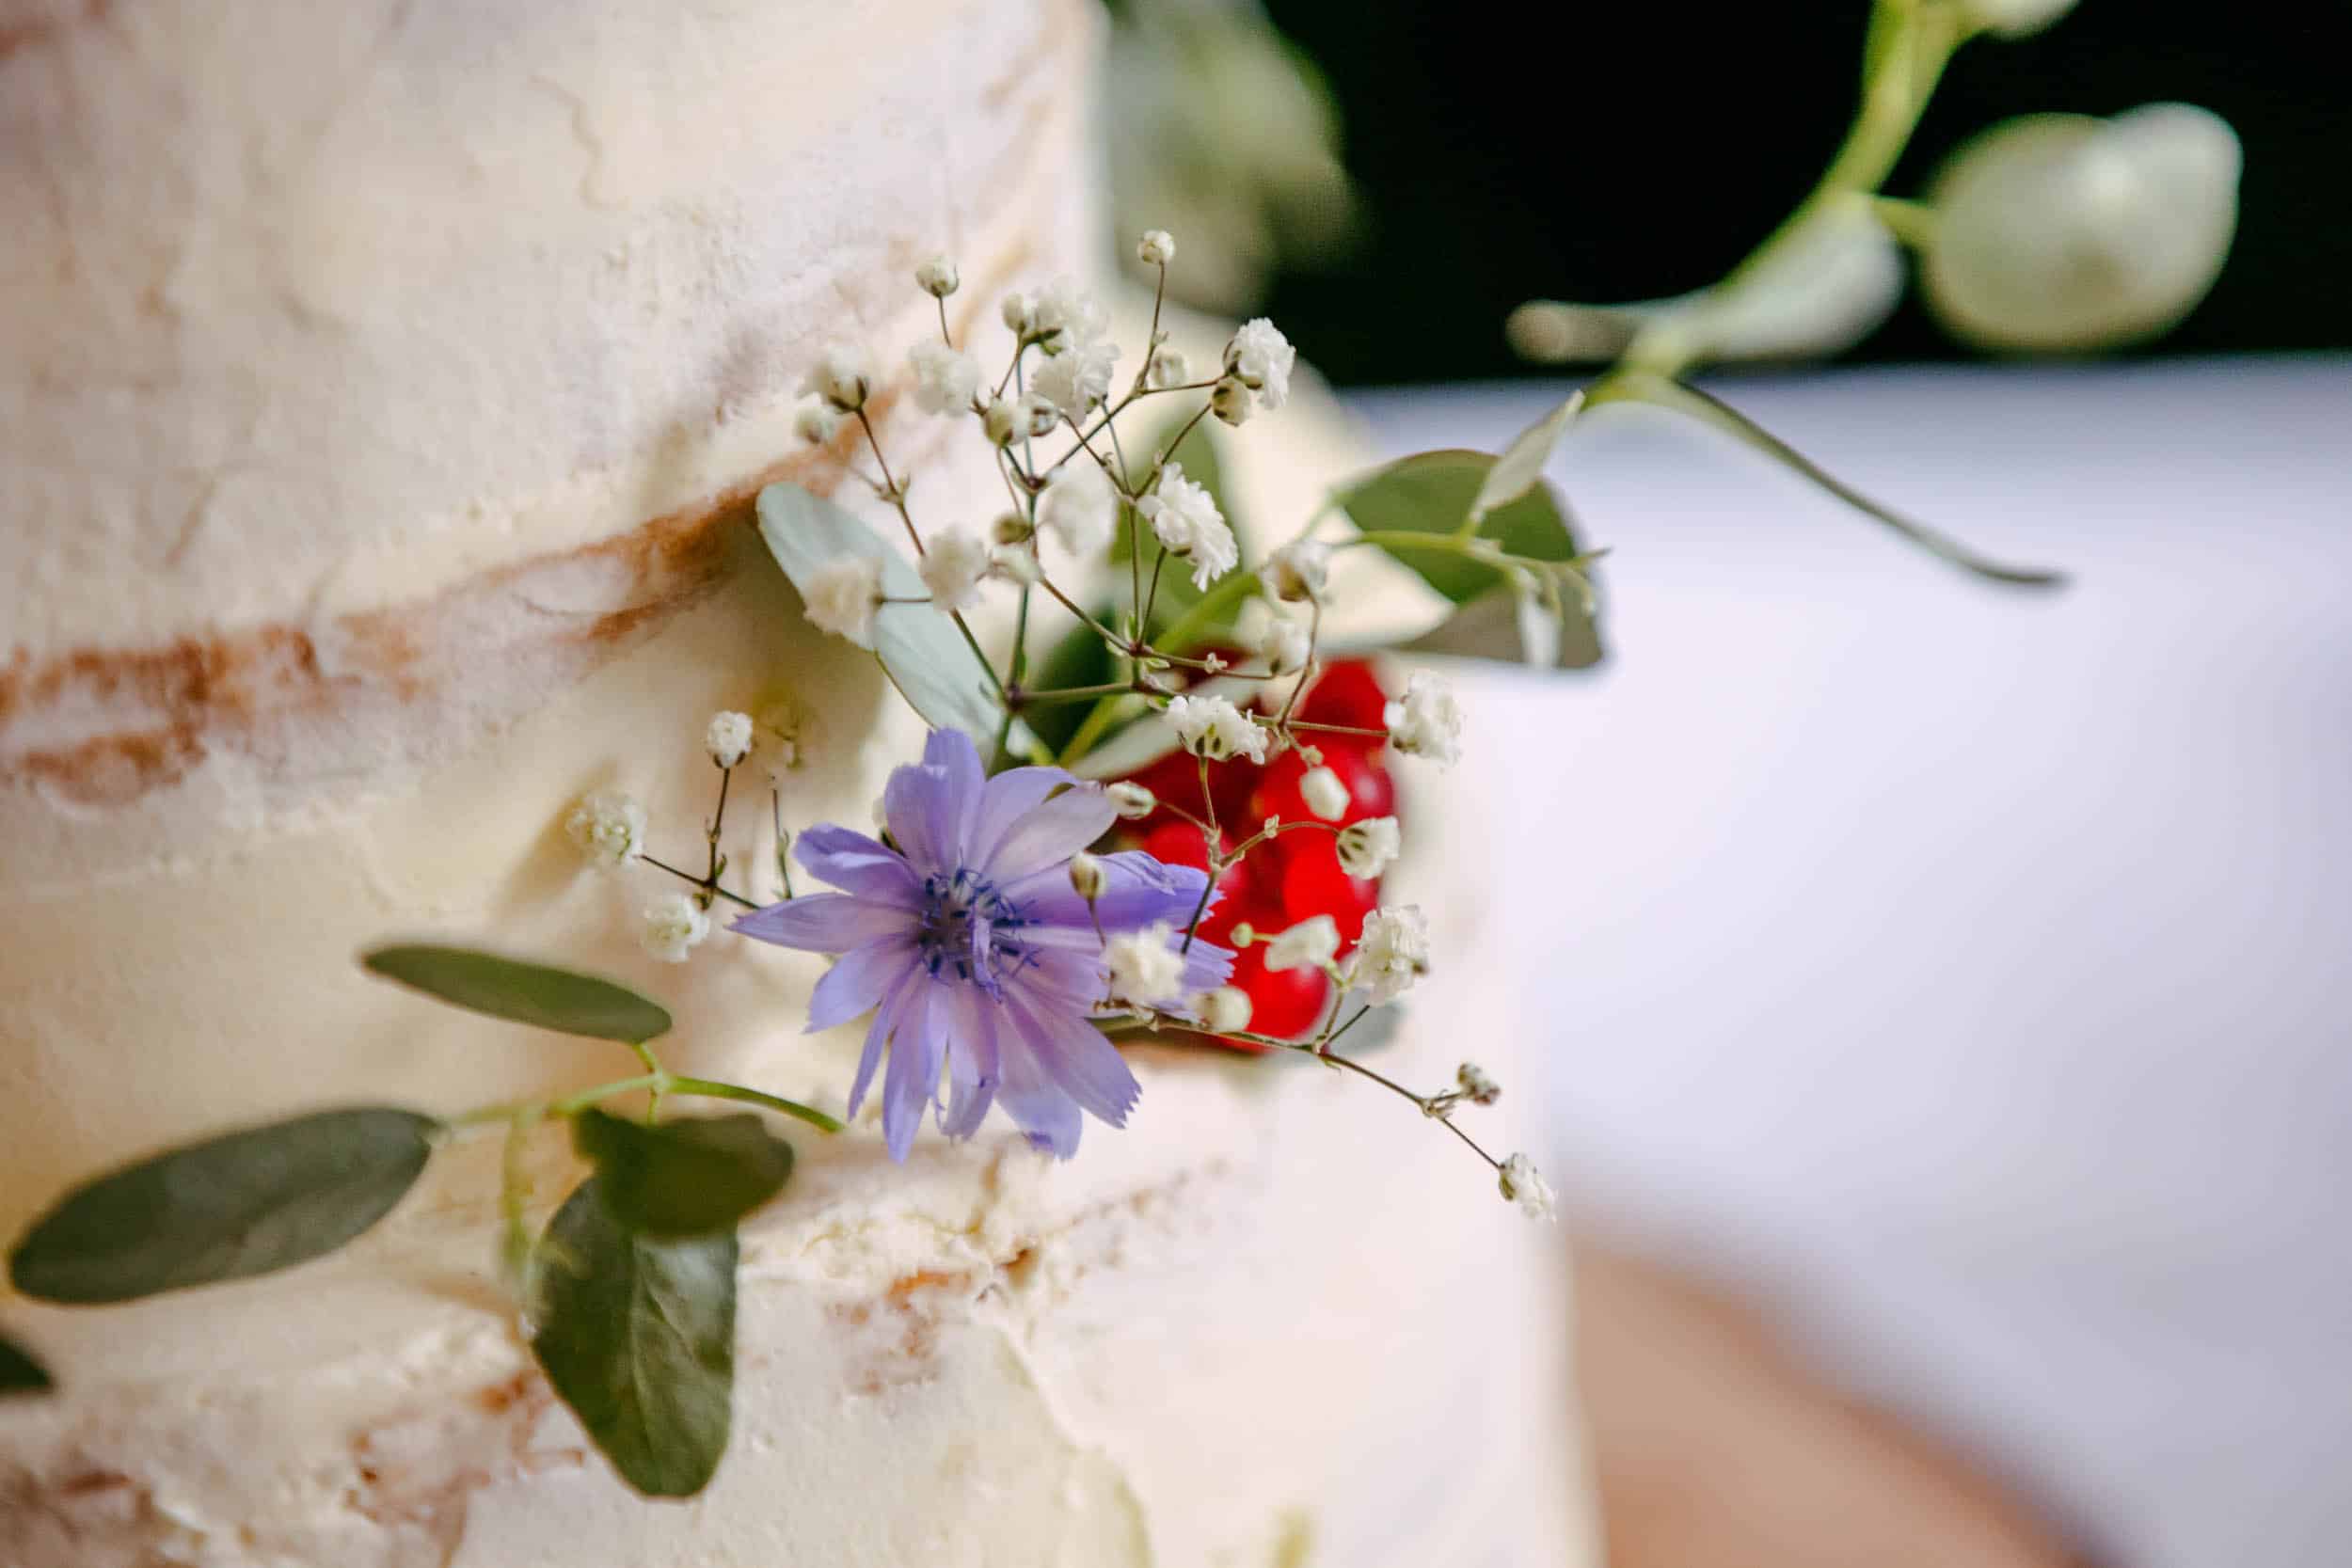 A close-up of a wedding cake with flowers on top.